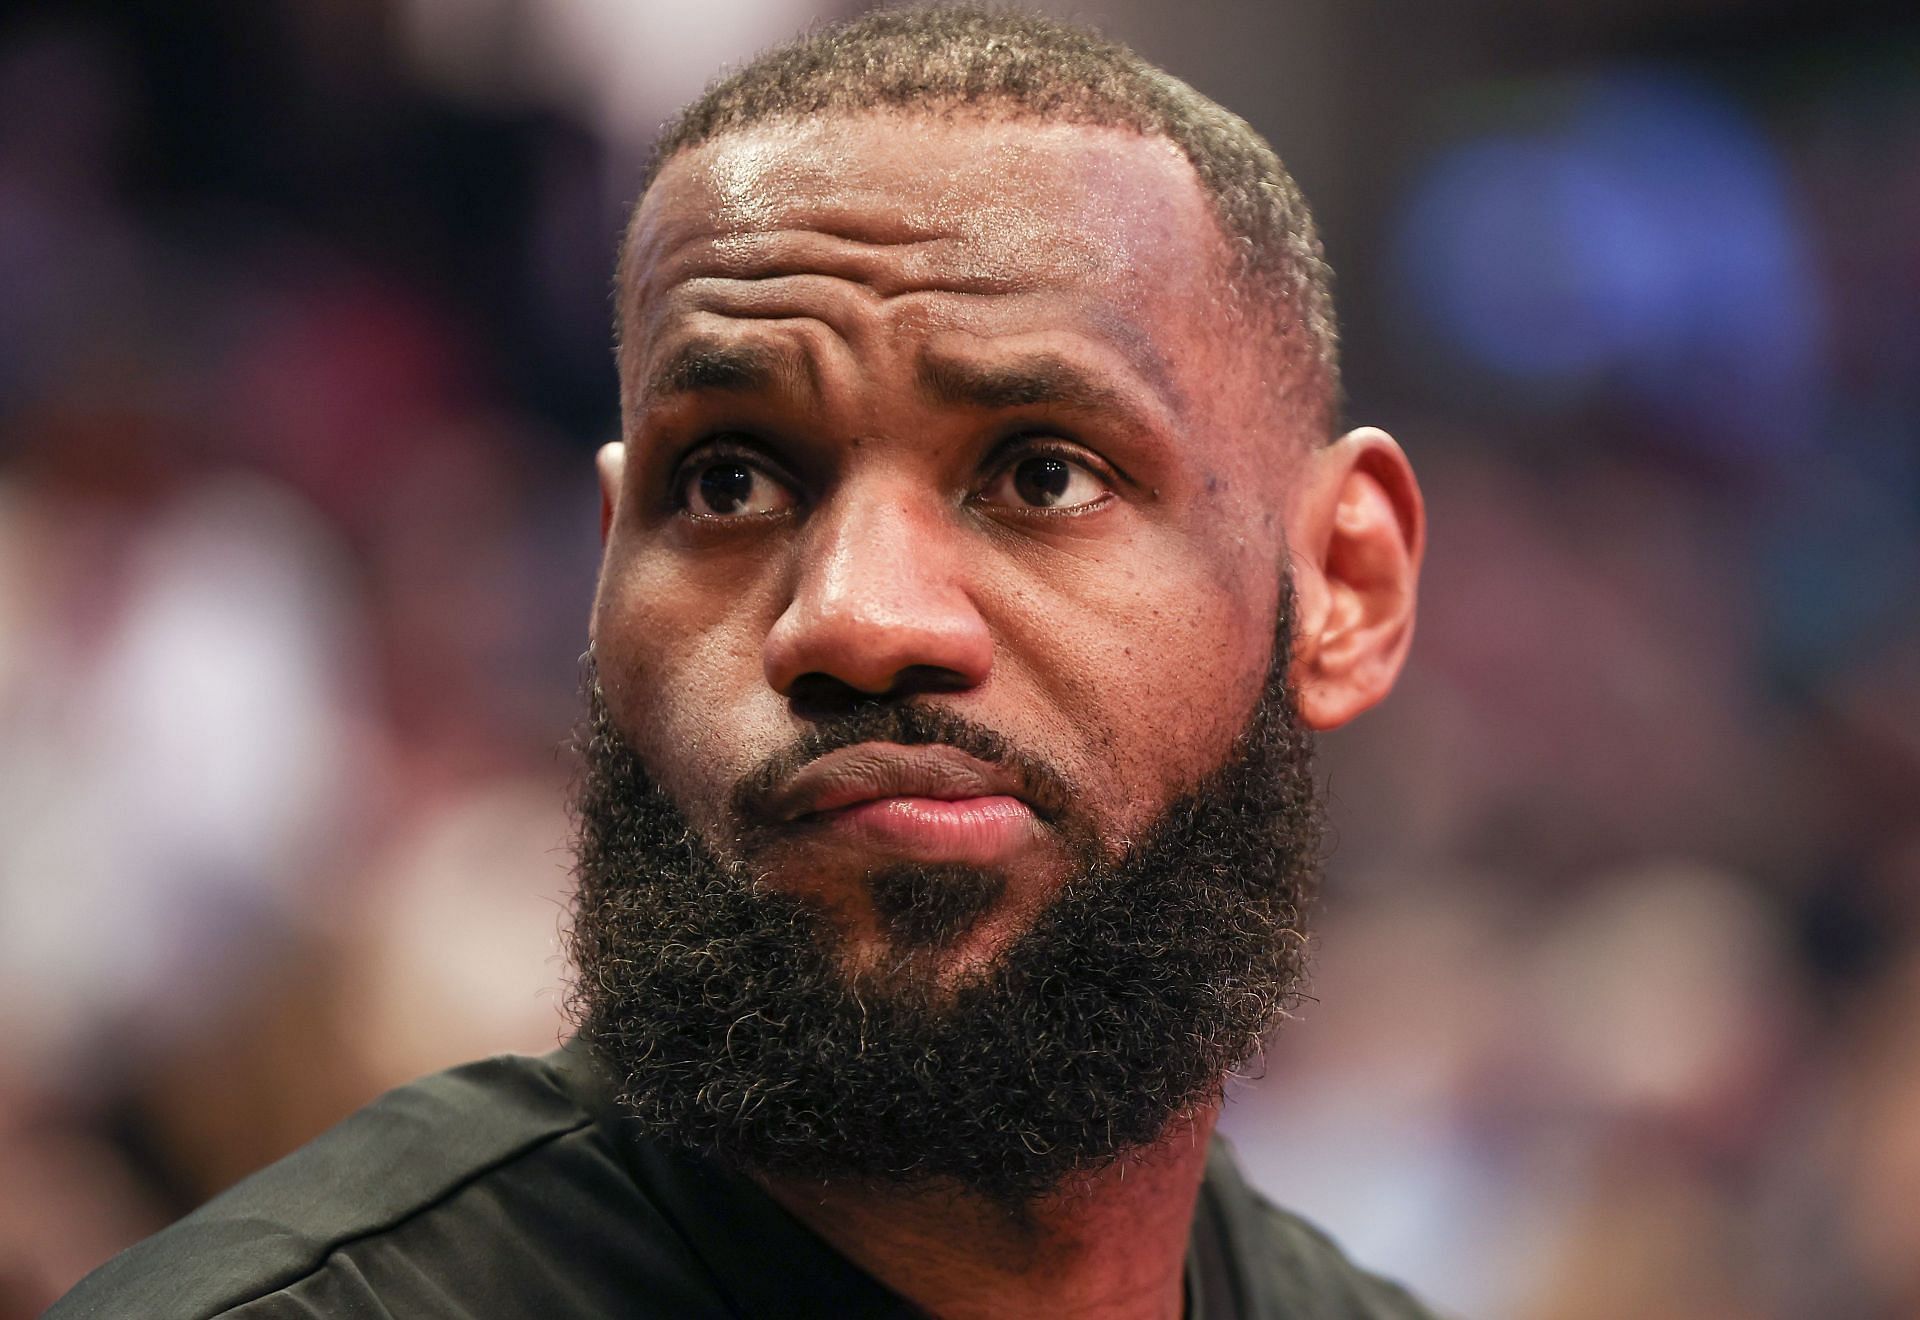 LA Lakers superstar LeBron James at the 2022 NBA All-Star Game